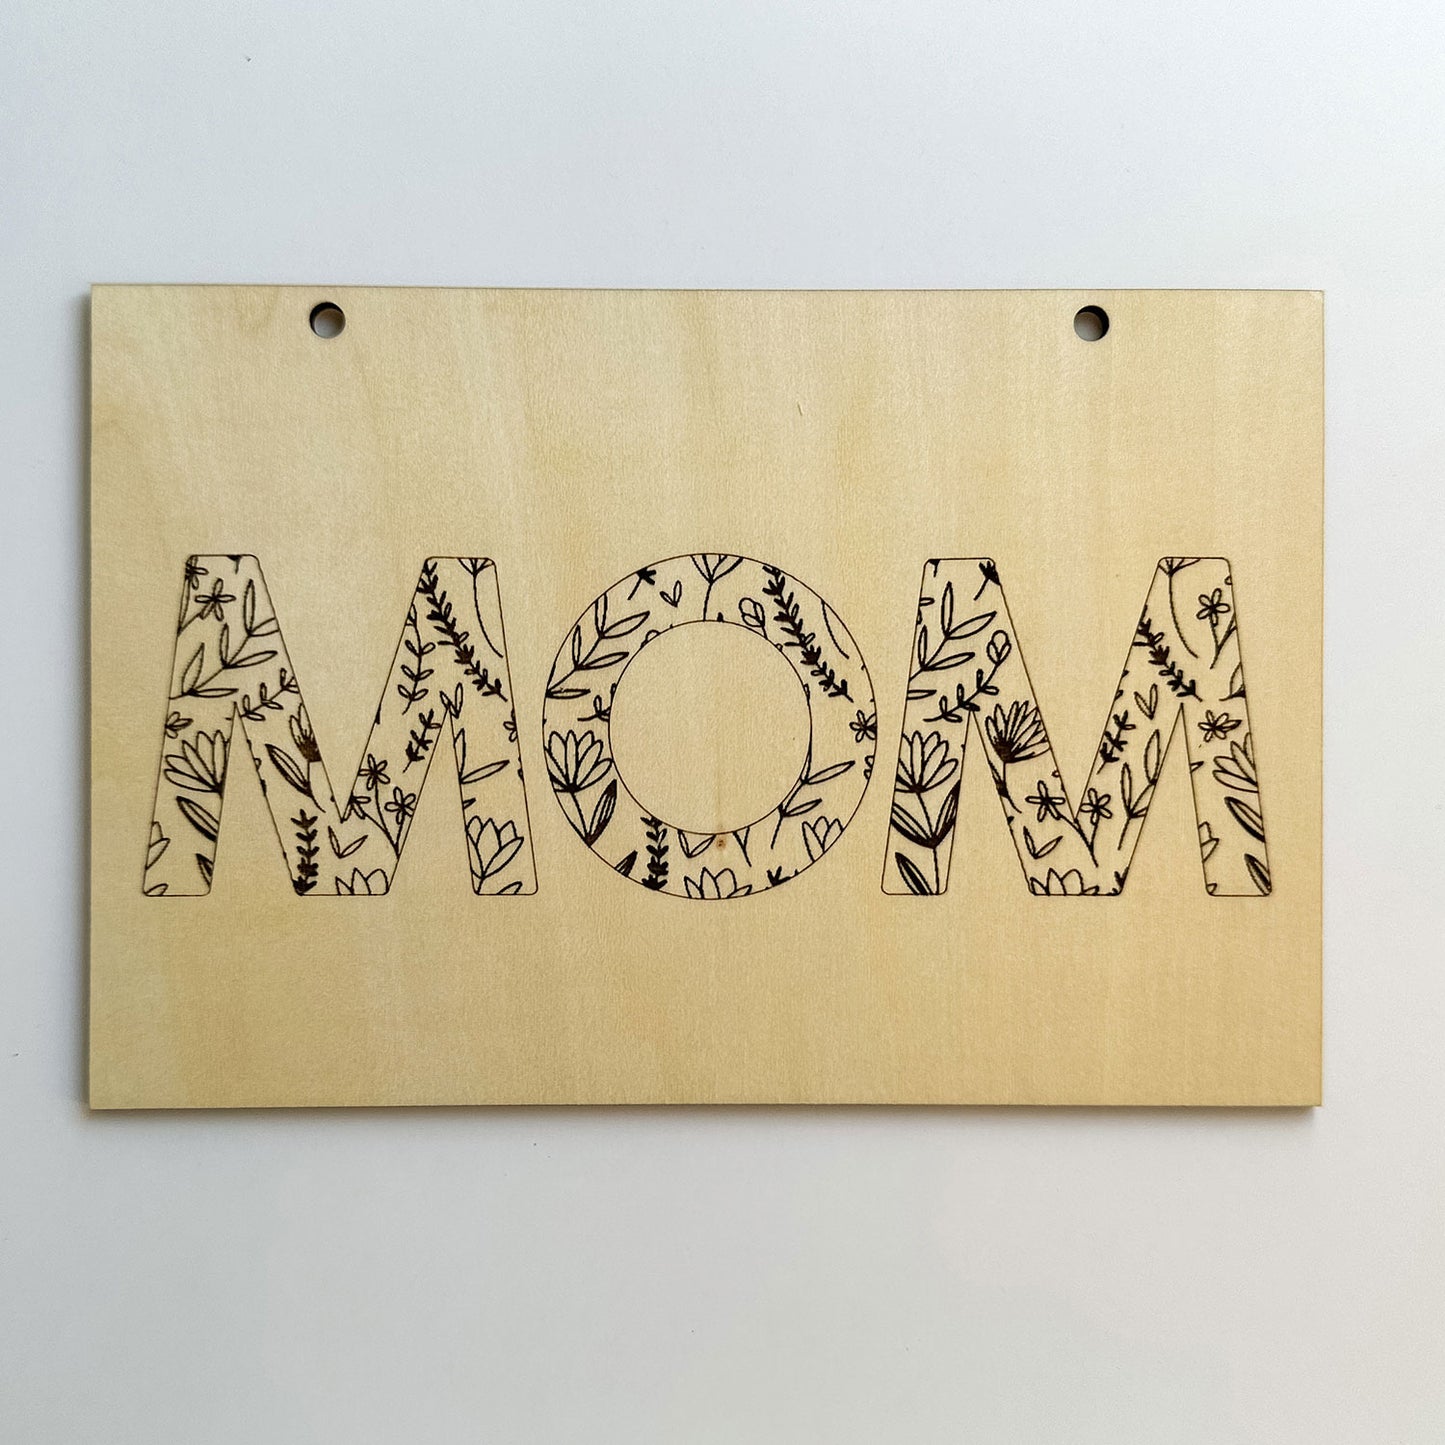 Floral MOM Photo Album Cover - Mother's Day Gift